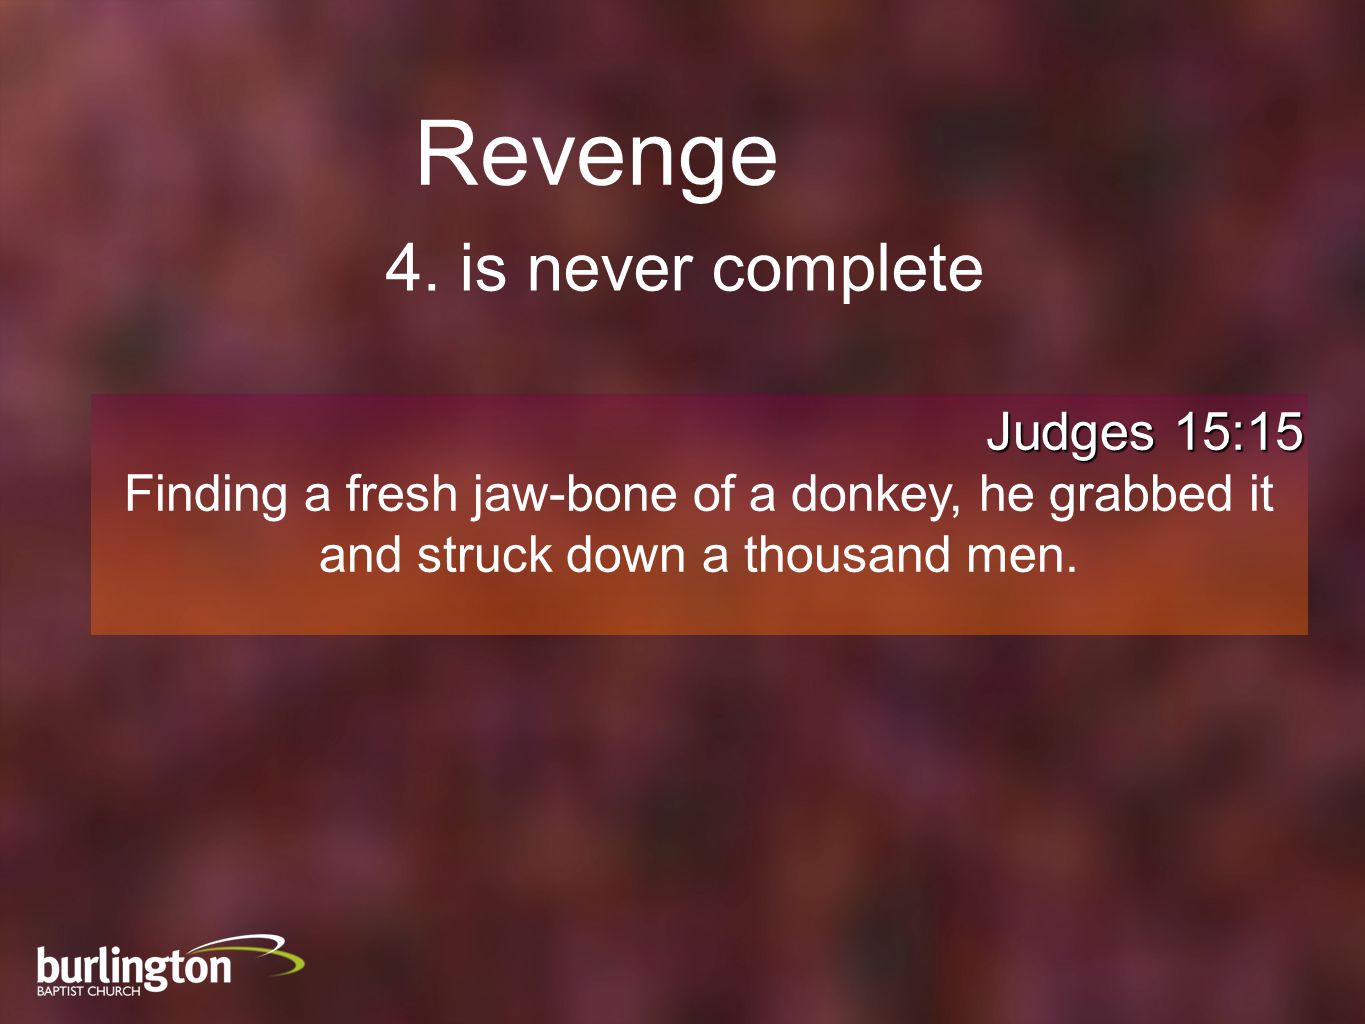 Judges 15:15 Finding a fresh jaw-bone of a donkey, he grabbed it and struck down a thousand men.